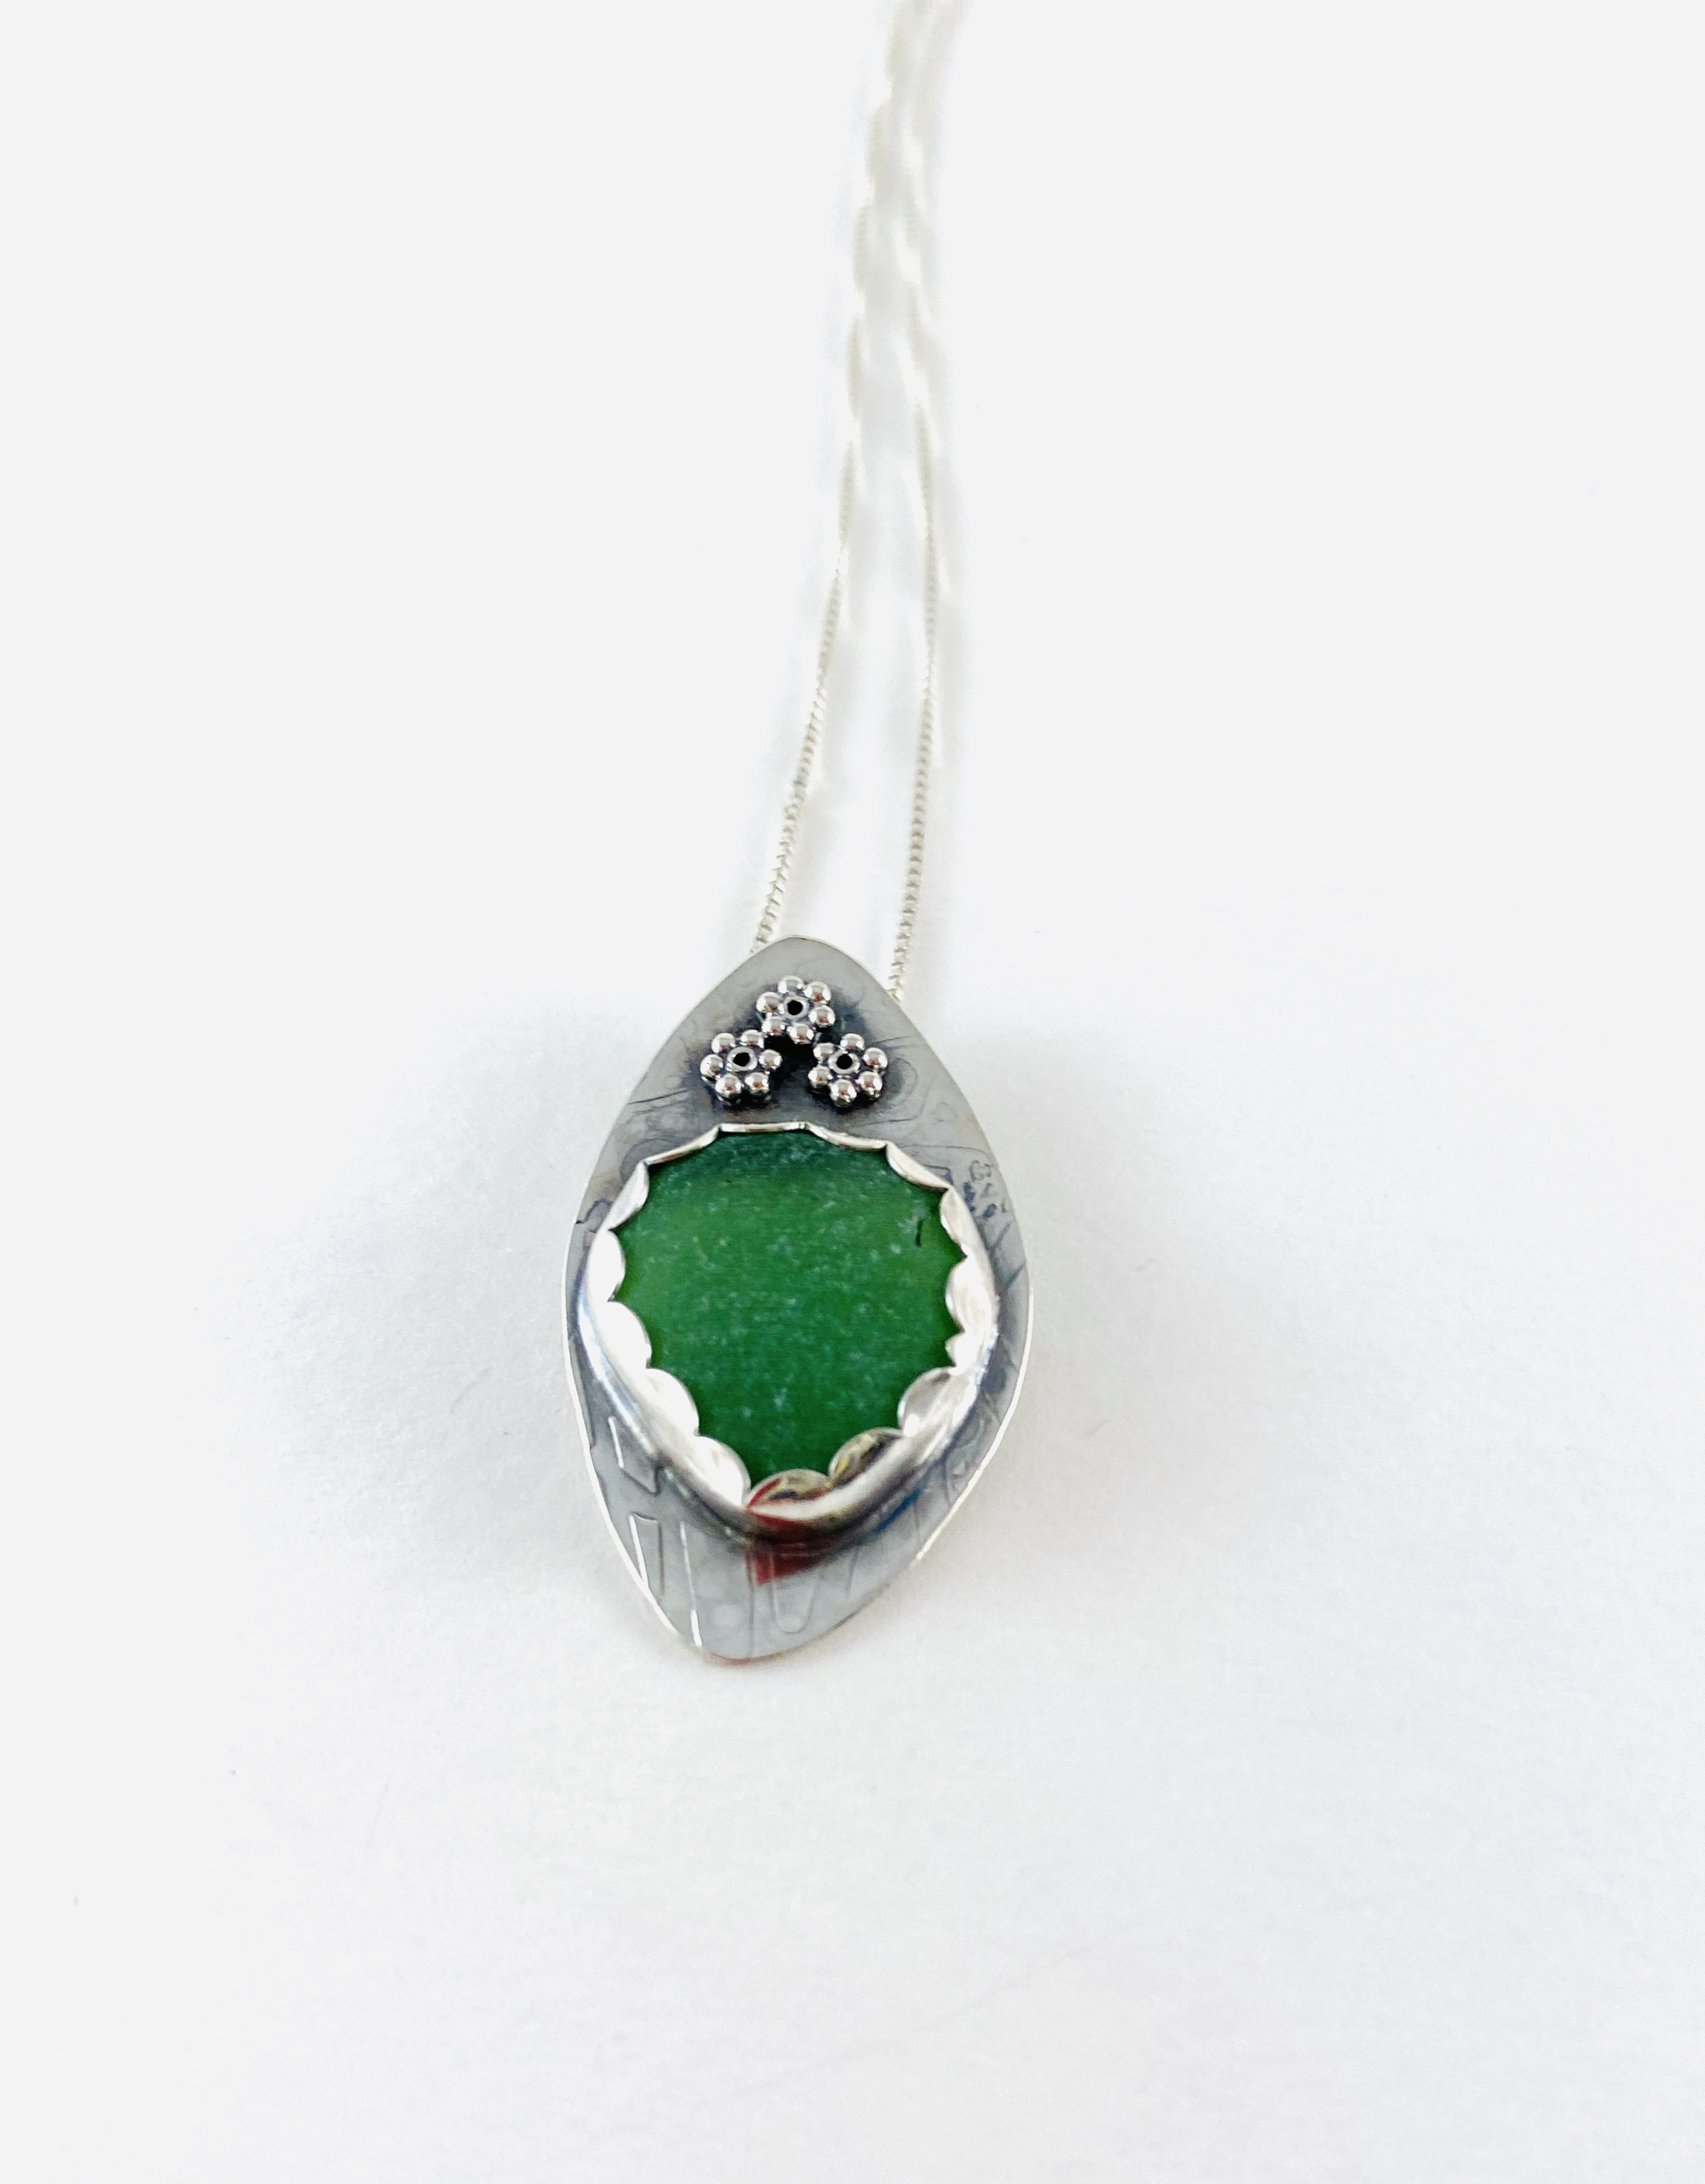 Silver and Sea Glass Pendant on Silver Box Chain; #106 by Anne Bivens